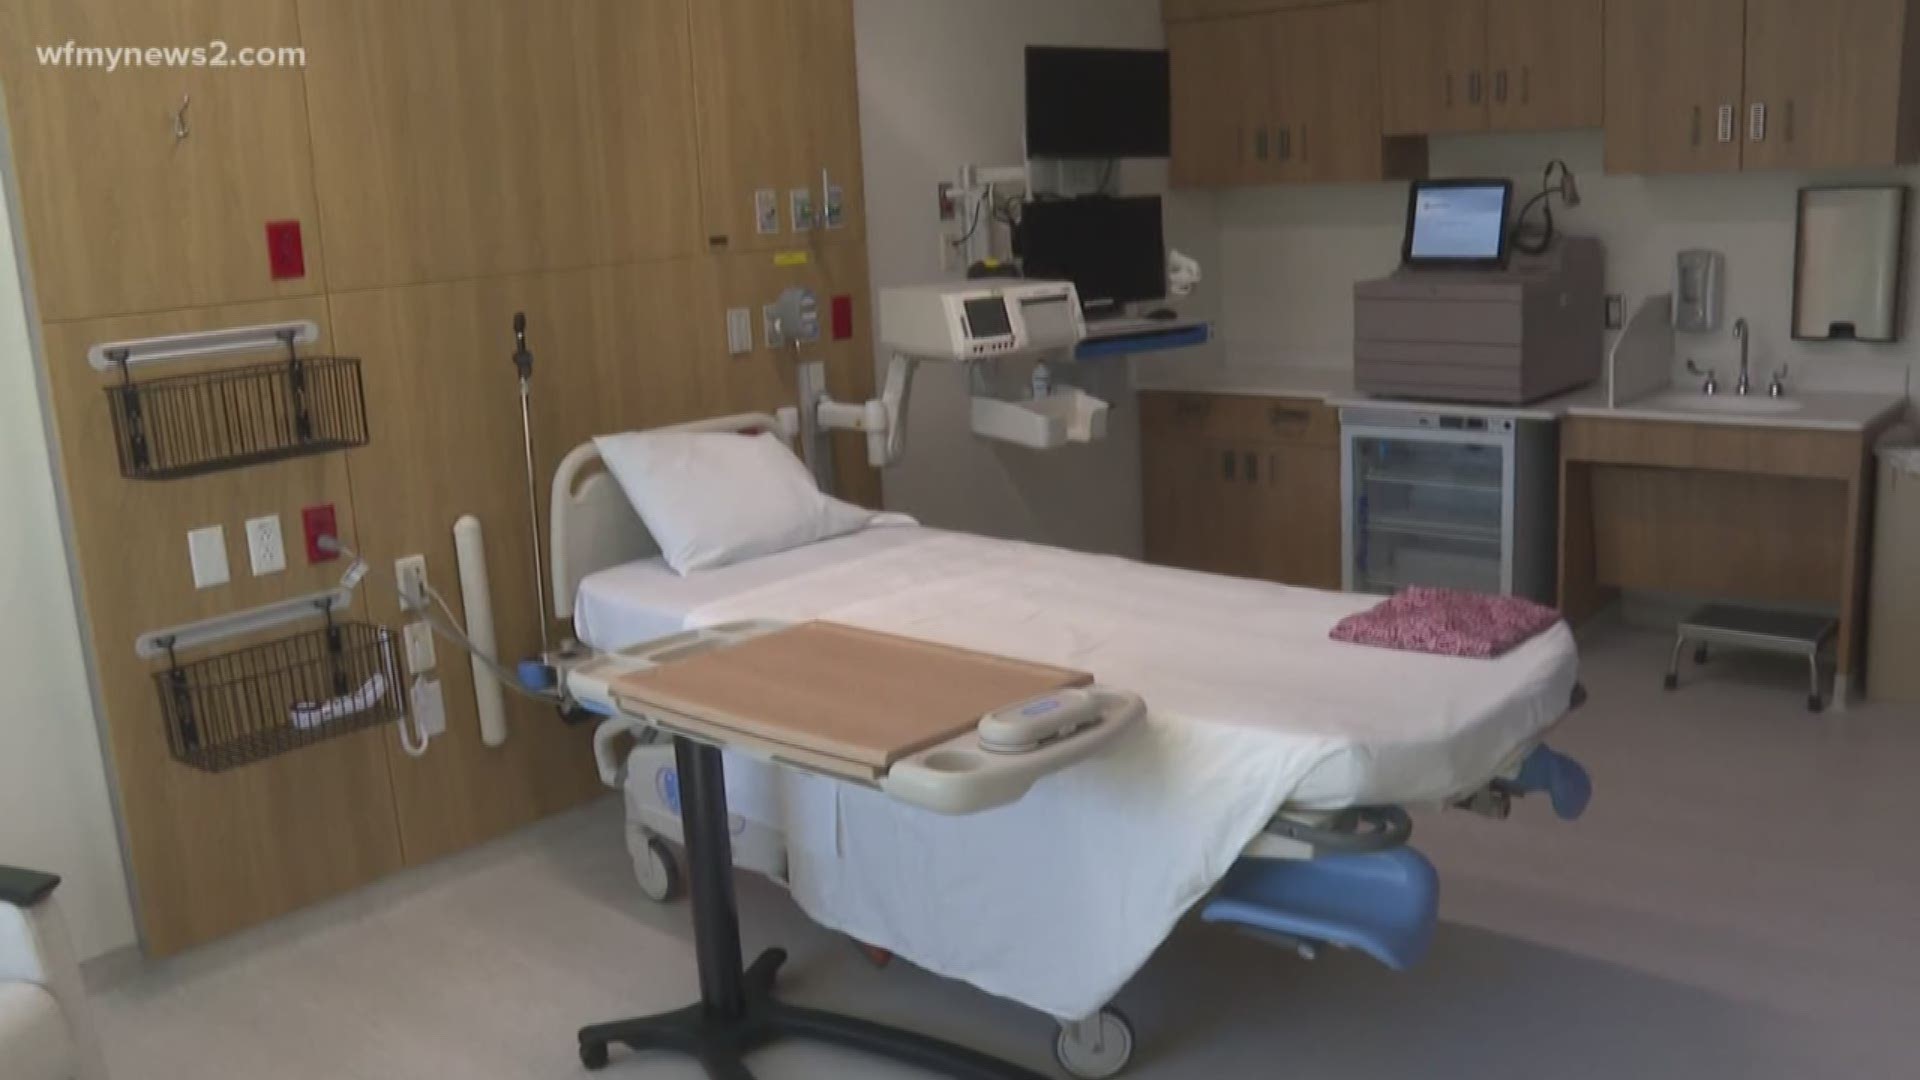 The public was allowed to walk through the new Women and Children's center at Cone Health.